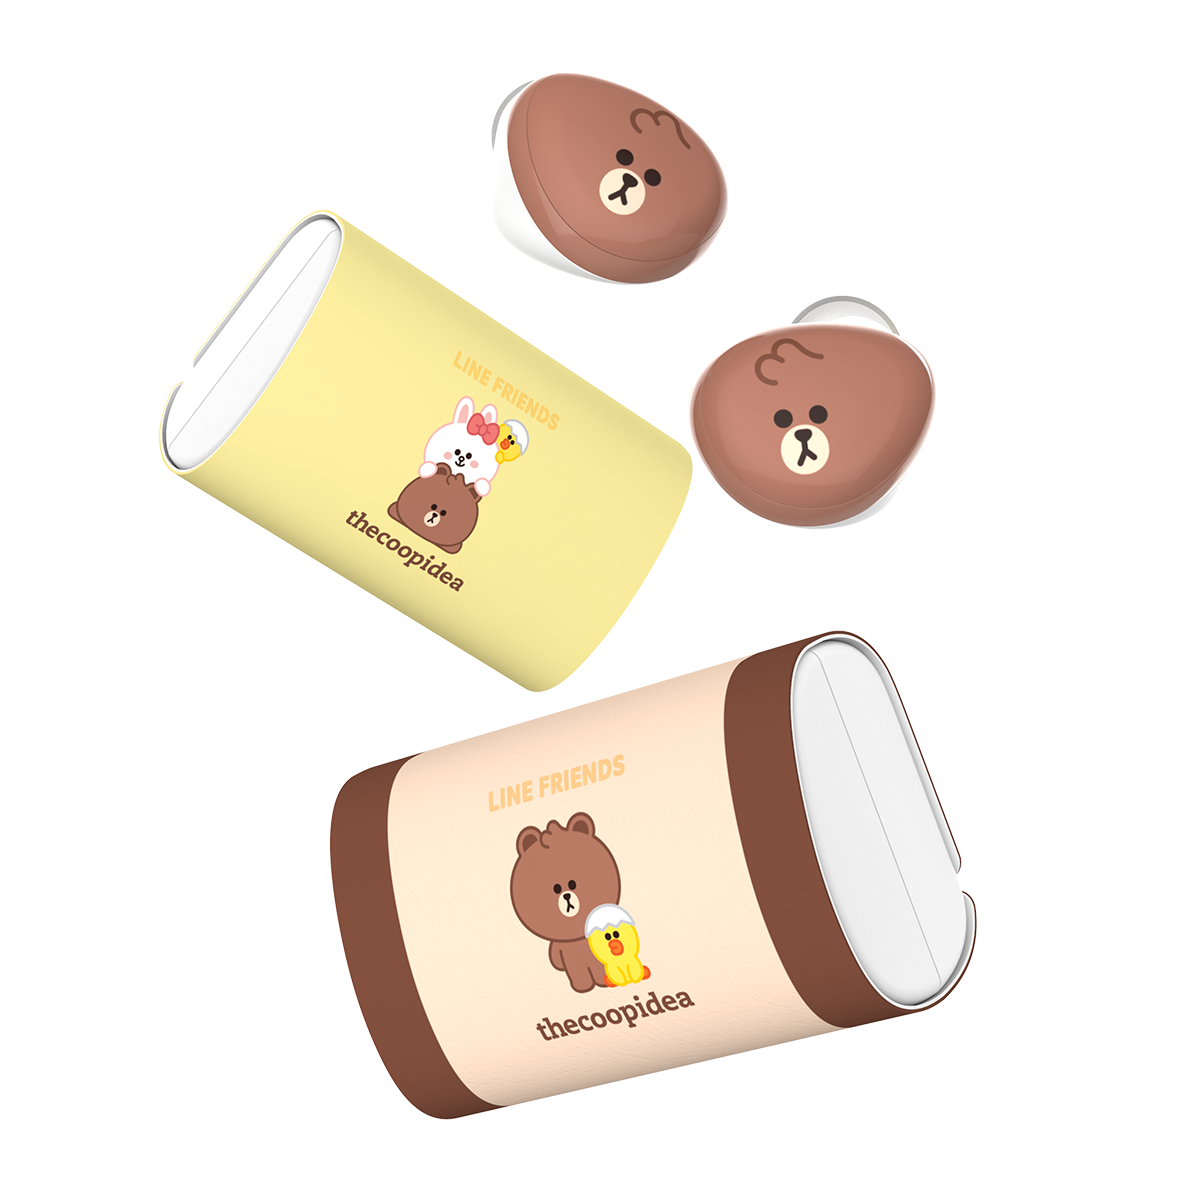 LINE FRIENDS MEETS thecoopidea BEANS+ True Wireless Earbuds - MINI BROWN